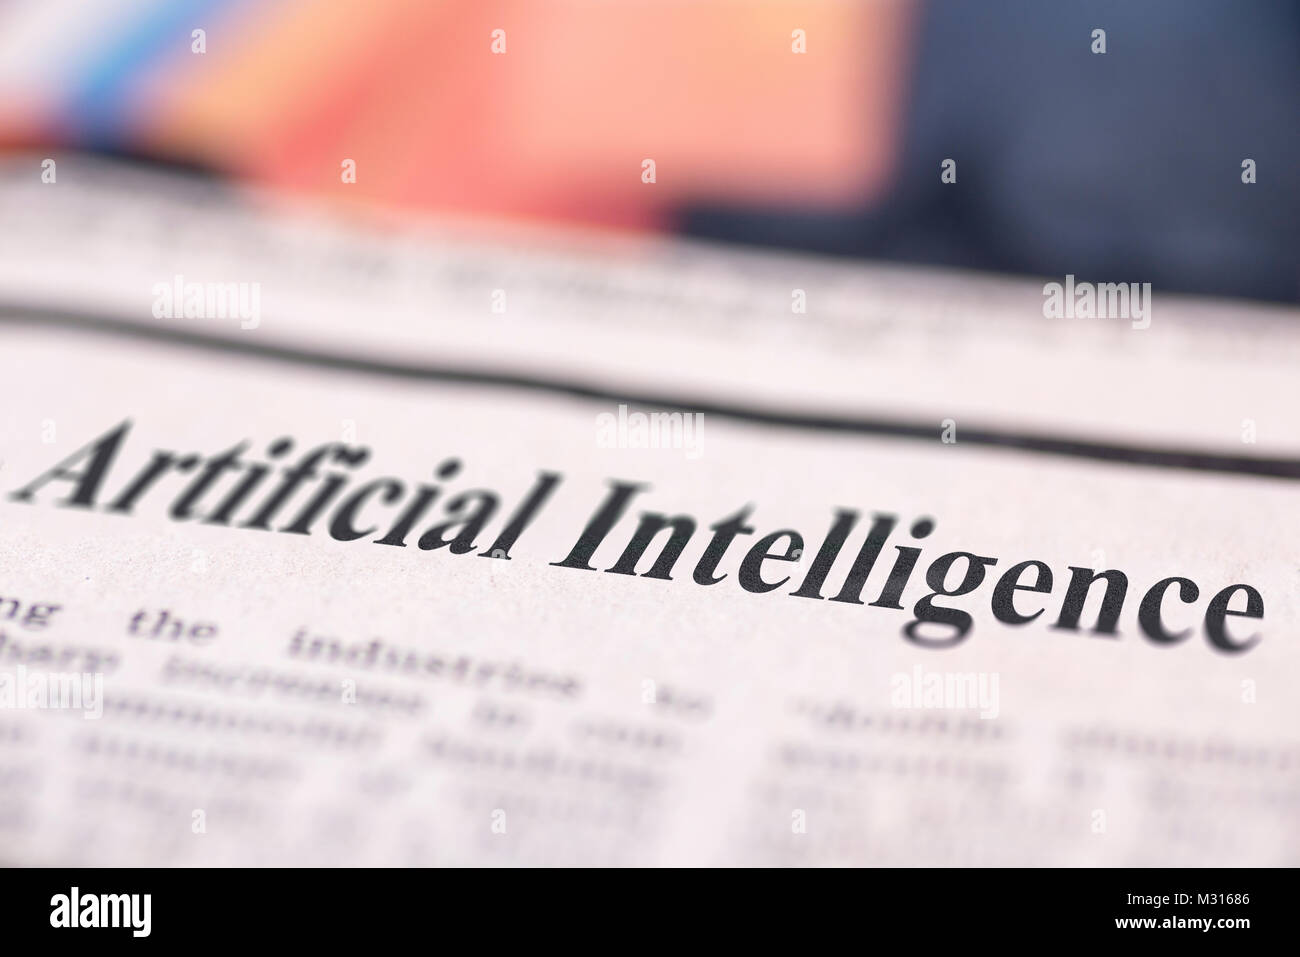 Artificial Intelligence written newspaper close up shot to the text. Stock Photo